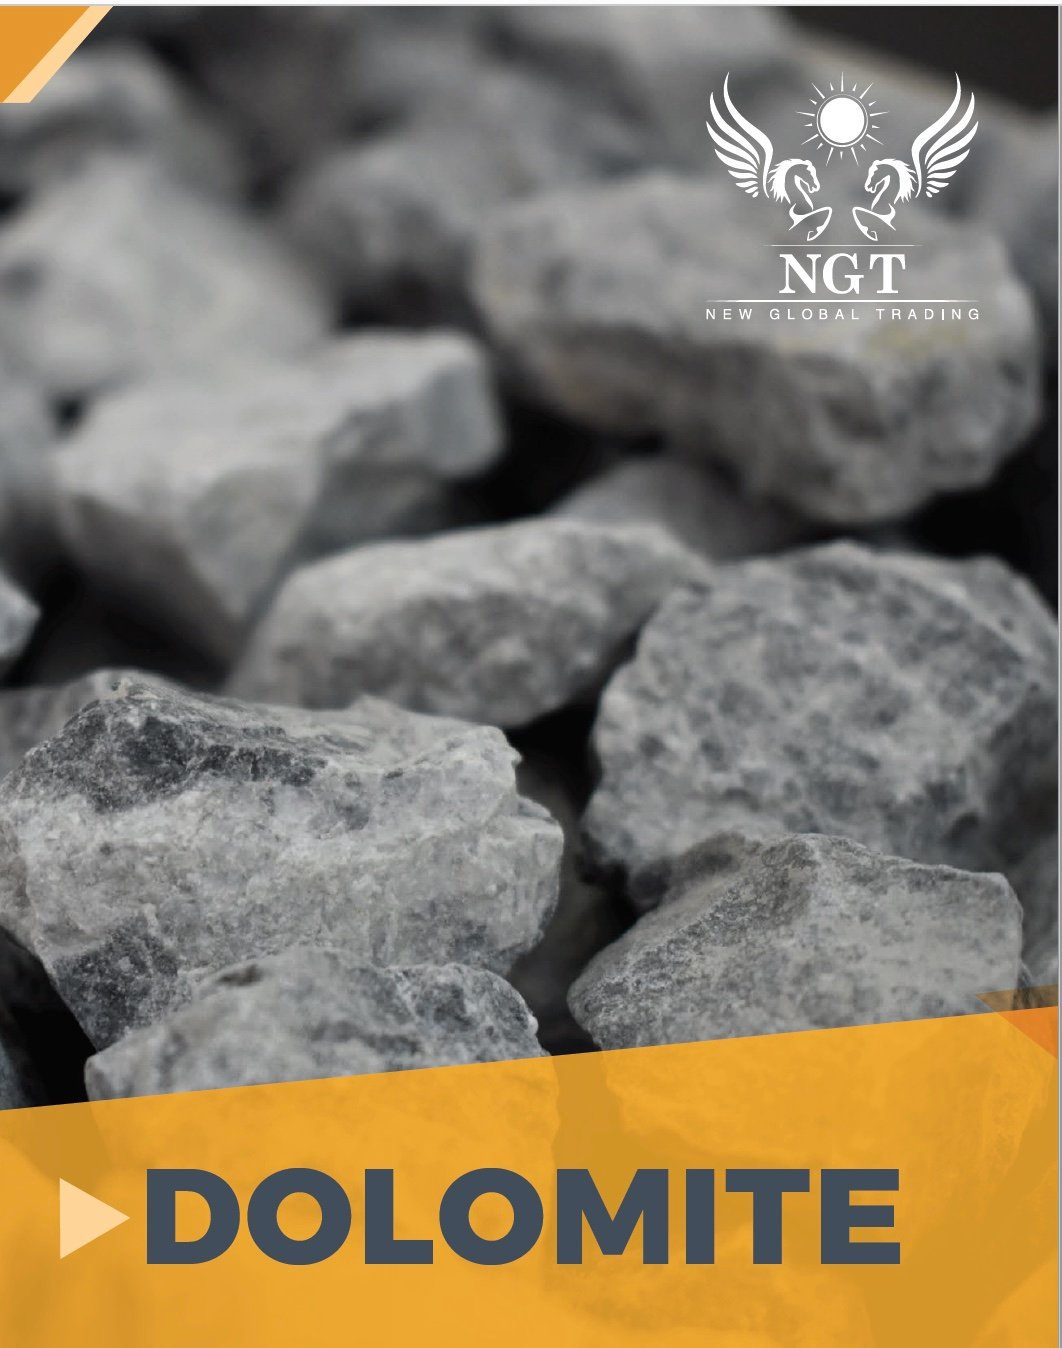 NGT Vietnam Dolomite Product Catalogue for Glass & Steel Industries